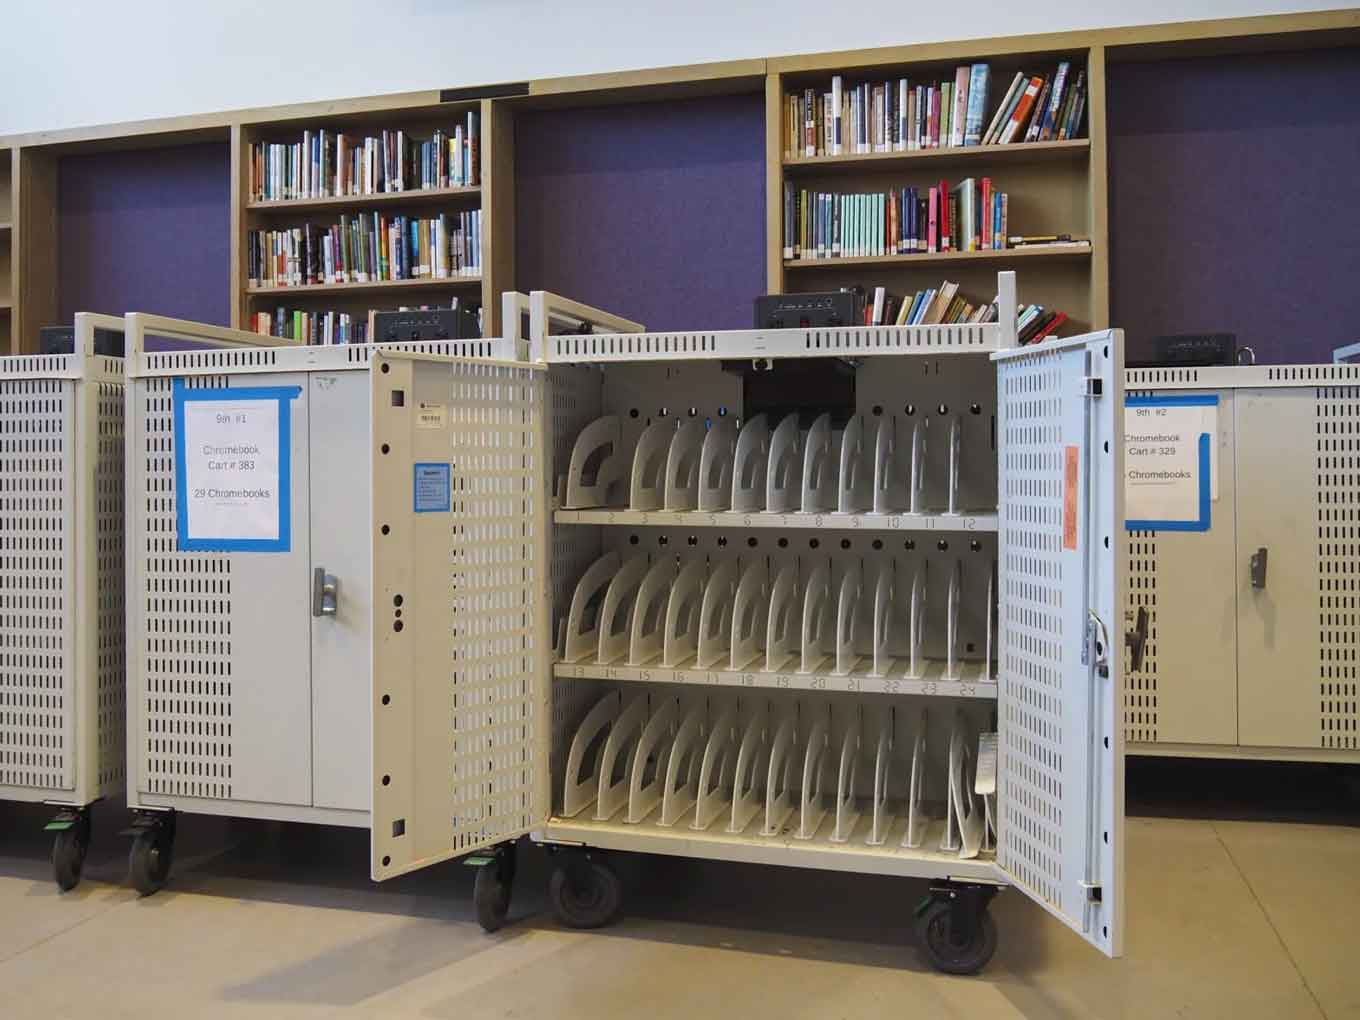 Inside Castlemont’s media center in May 2021, Chromebook carts are completely empty. In the early days of the pandemic, every Chromebook on campus was lent out to students during remote learning.